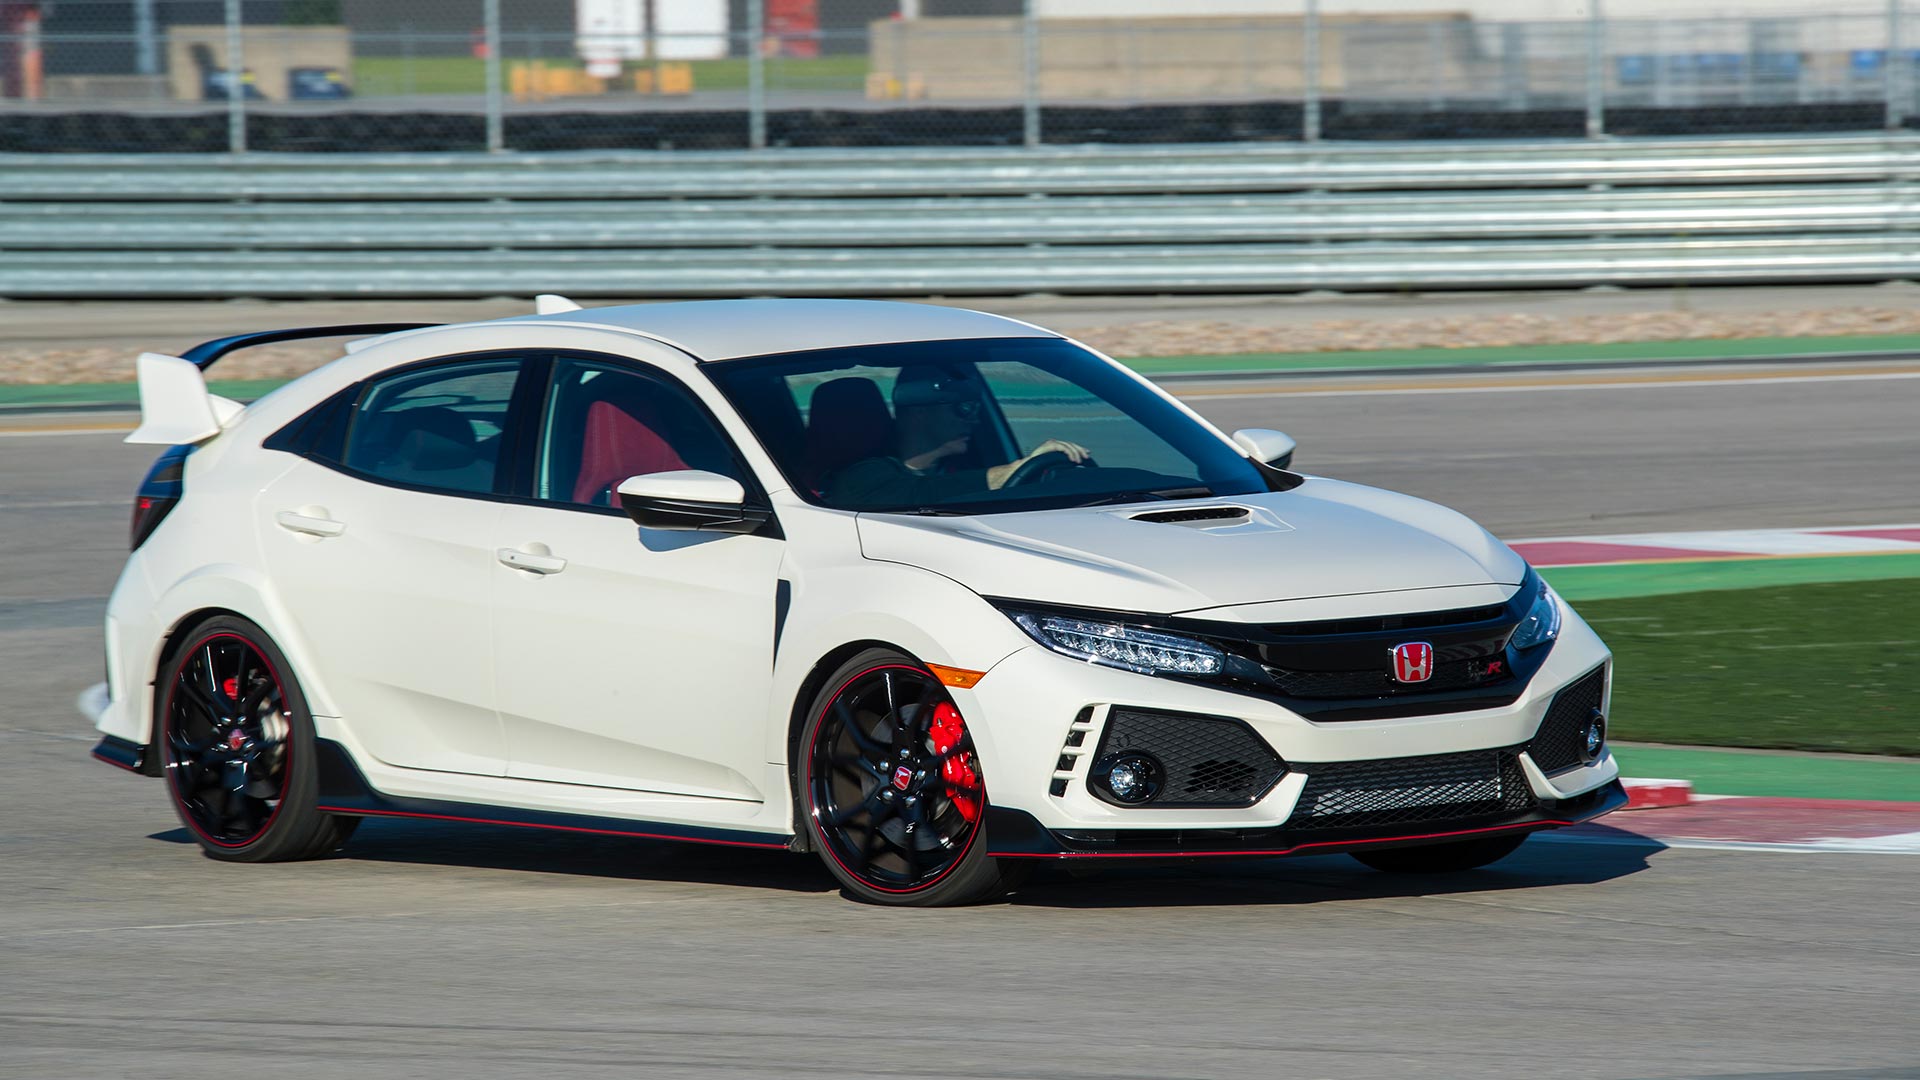 Honda Civic Type R Has No Automatic Transmission Because It’d Be Too Heavy